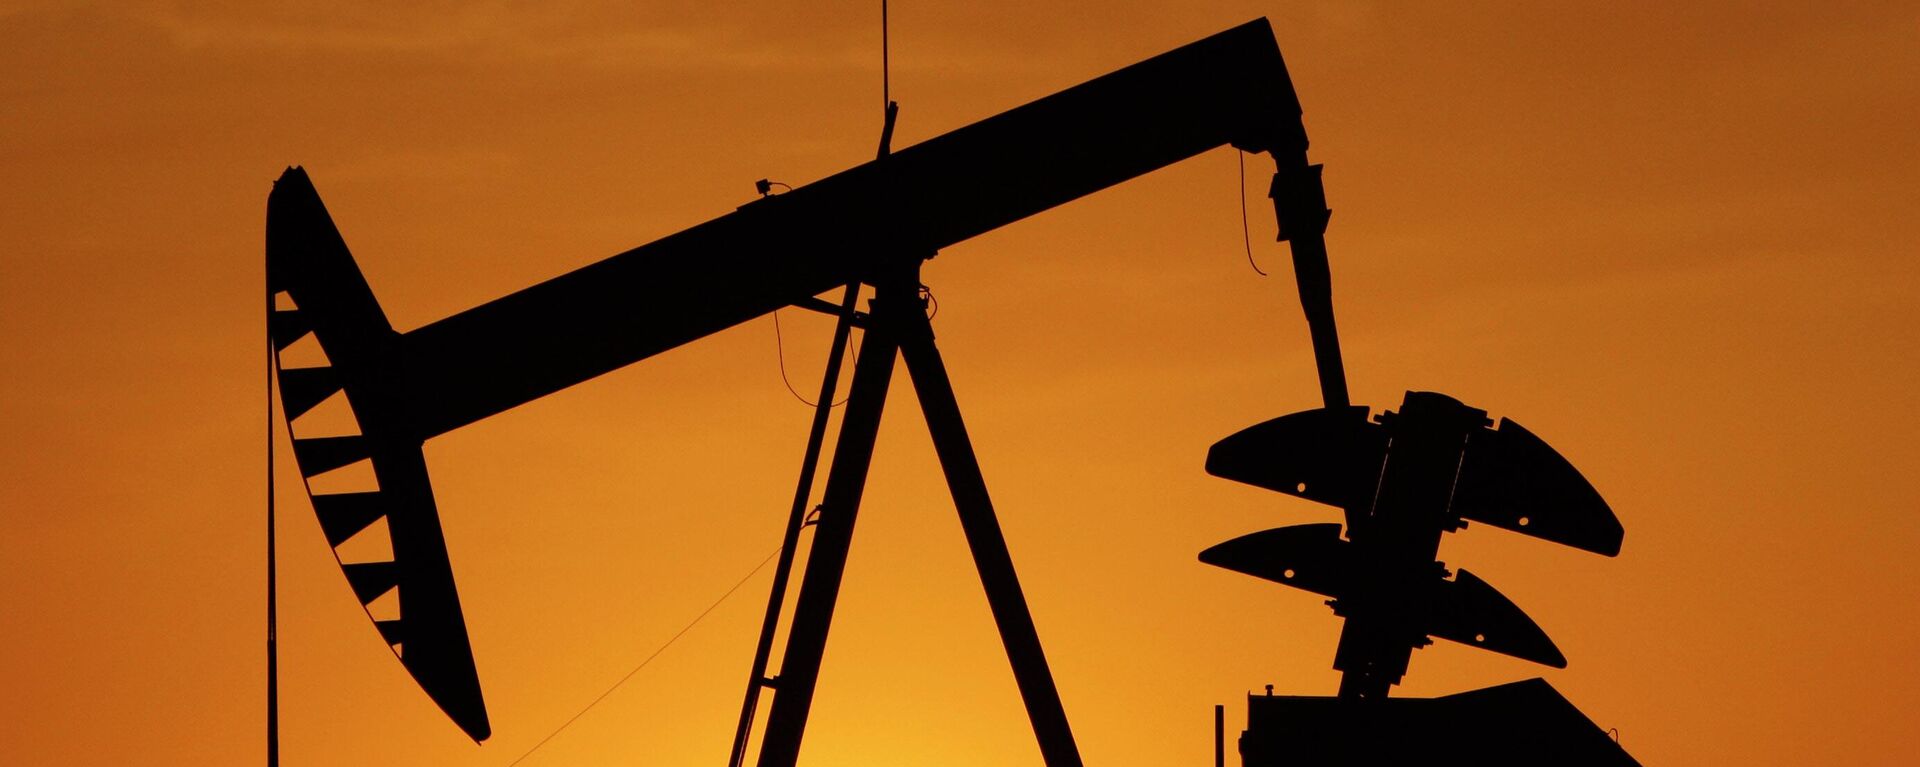 A pump jack is silhouetted against the setting sun in Oklahoma City on March 22, 2012.  - Sputnik International, 1920, 14.05.2022